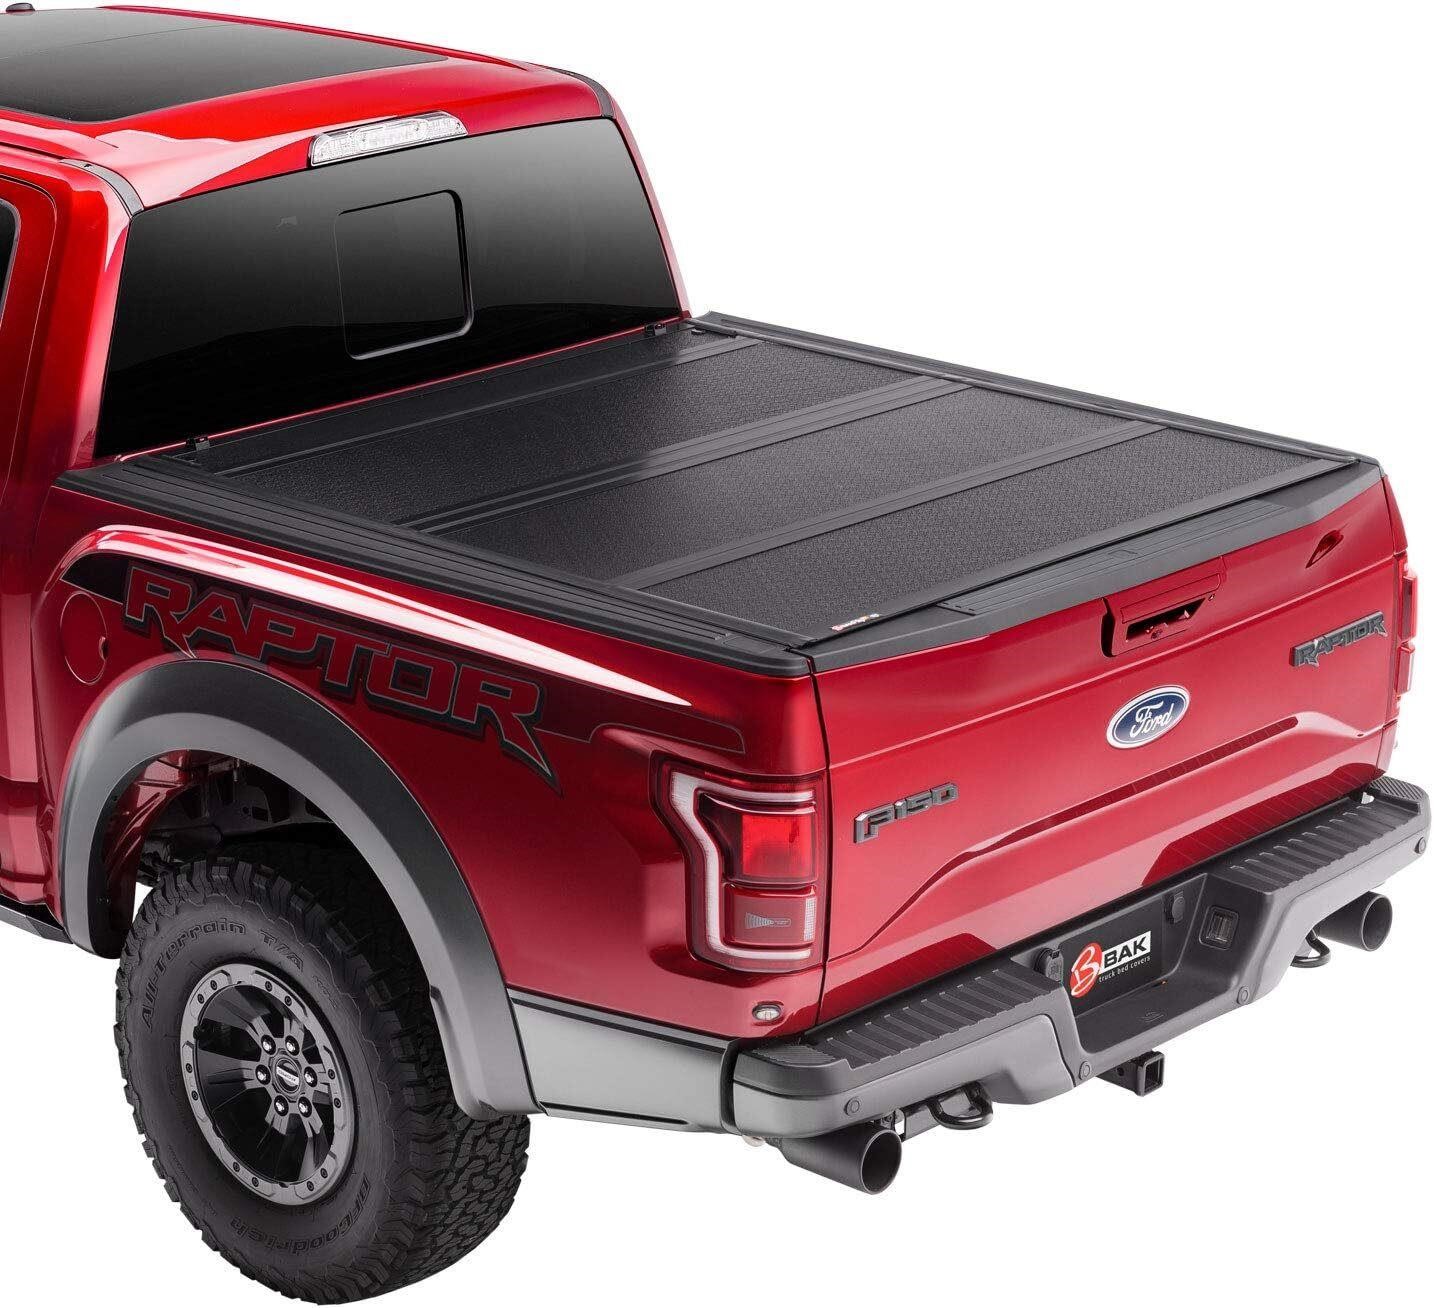 BAKFlip F1 Cover | Fits '16-'23 Tacoma 5'1 Bed